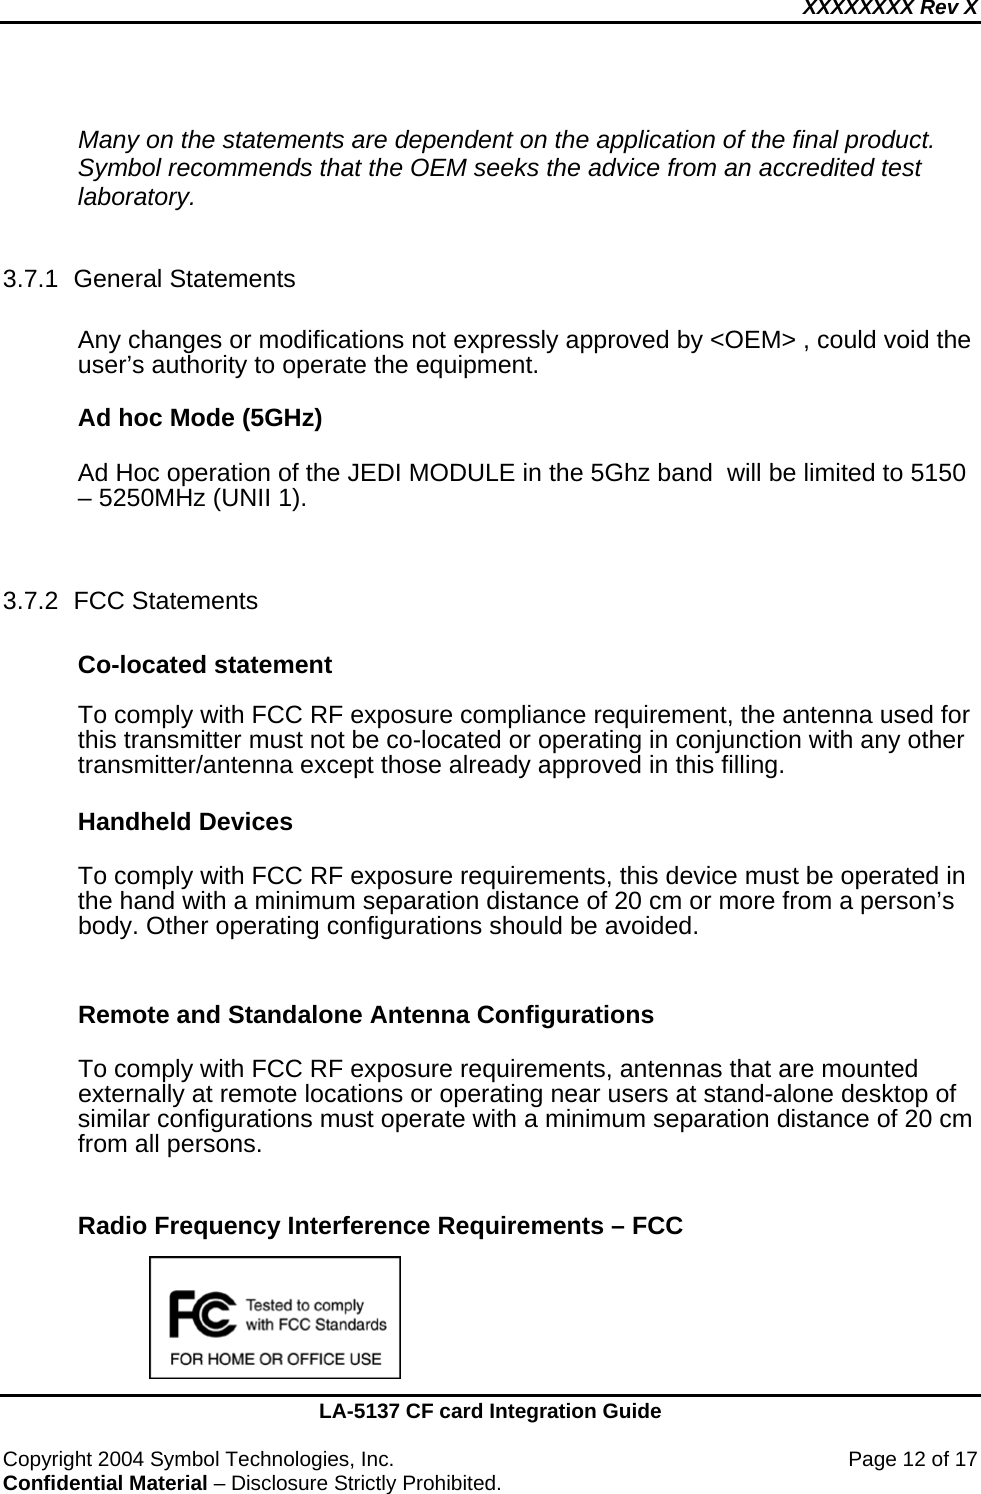 XXXXXXXX Rev X    LA-5137 CF card Integration Guide  Copyright 2004 Symbol Technologies, Inc.    Page 12 of 17 Confidential Material – Disclosure Strictly Prohibited.  Many on the statements are dependent on the application of the final product.  Symbol recommends that the OEM seeks the advice from an accredited test laboratory.  3.7.1 General Statements  Any changes or modifications not expressly approved by &lt;OEM&gt; , could void the user’s authority to operate the equipment.  Ad hoc Mode (5GHz)  Ad Hoc operation of the JEDI MODULE in the 5Ghz band  will be limited to 5150 – 5250MHz (UNII 1).   3.7.2 FCC Statements  Co-located statement  To comply with FCC RF exposure compliance requirement, the antenna used for this transmitter must not be co-located or operating in conjunction with any other transmitter/antenna except those already approved in this filling.  Handheld Devices  To comply with FCC RF exposure requirements, this device must be operated in the hand with a minimum separation distance of 20 cm or more from a person’s body. Other operating configurations should be avoided.  Remote and Standalone Antenna Configurations  To comply with FCC RF exposure requirements, antennas that are mounted externally at remote locations or operating near users at stand-alone desktop of similar configurations must operate with a minimum separation distance of 20 cm from all persons.    Radio Frequency Interference Requirements – FCC       